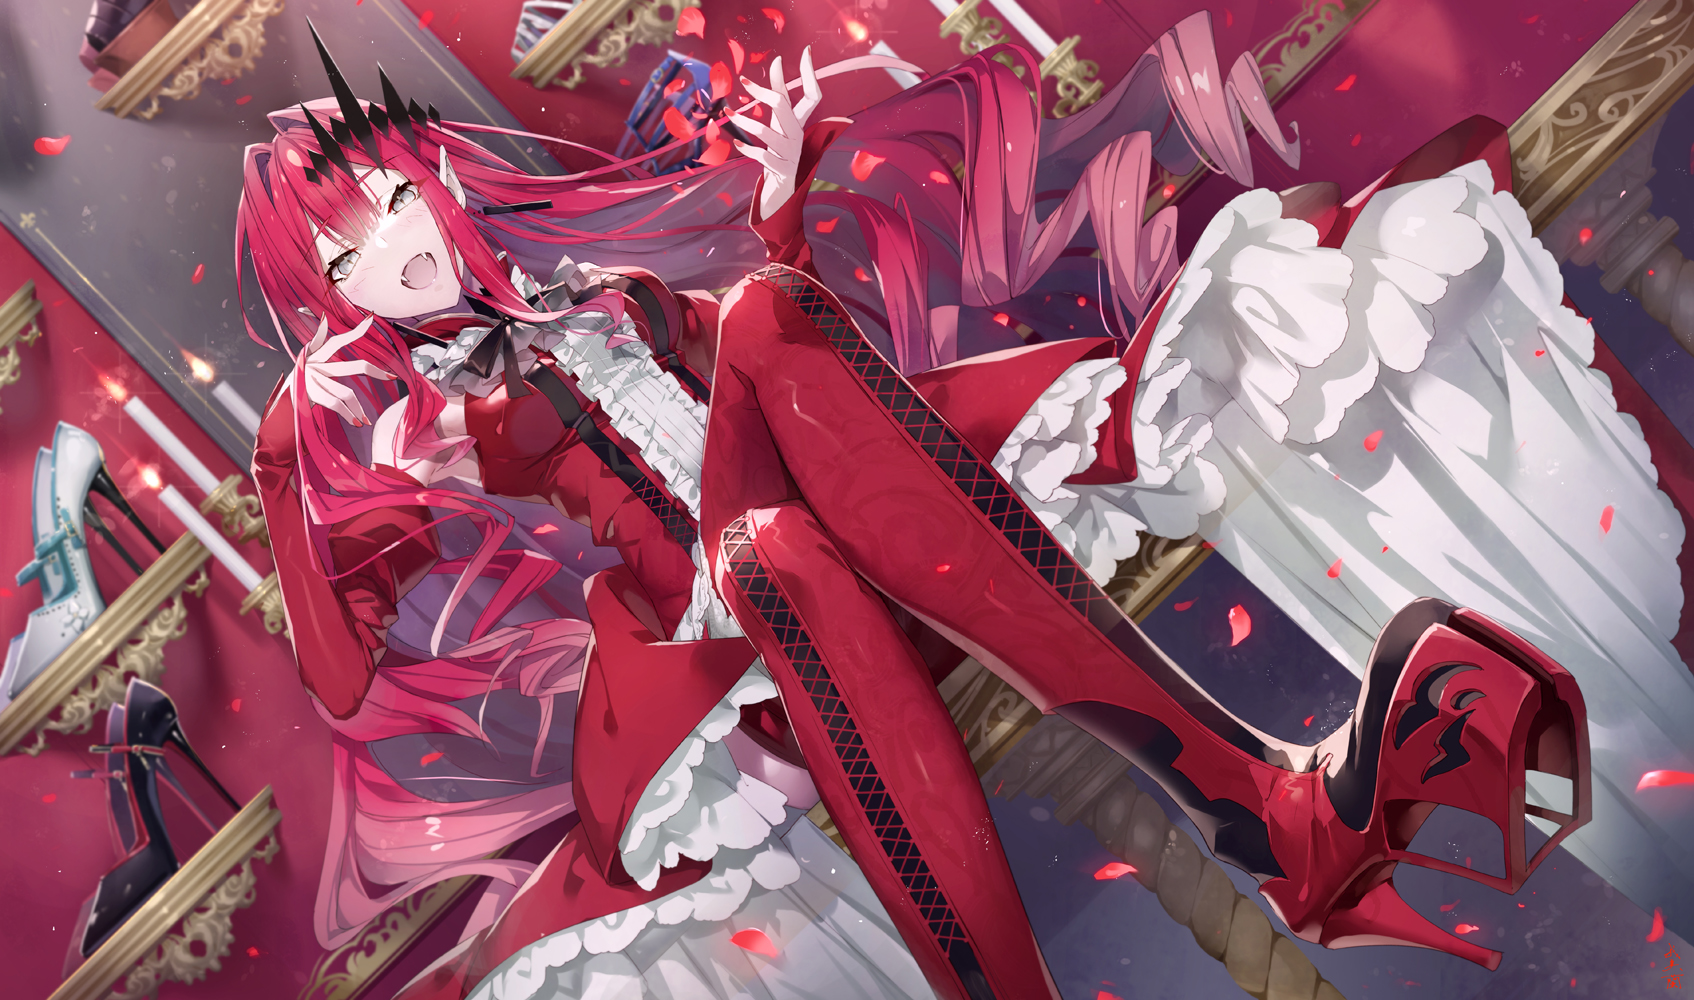 Anime 1694x1000 anime anime girls heels fangs vampires open mouth pointy ears sitting legs legs crossed long hair candles dress red dress redhead gray eyes Fate/Grand Order Fate series Gabiran Baobhan Sith